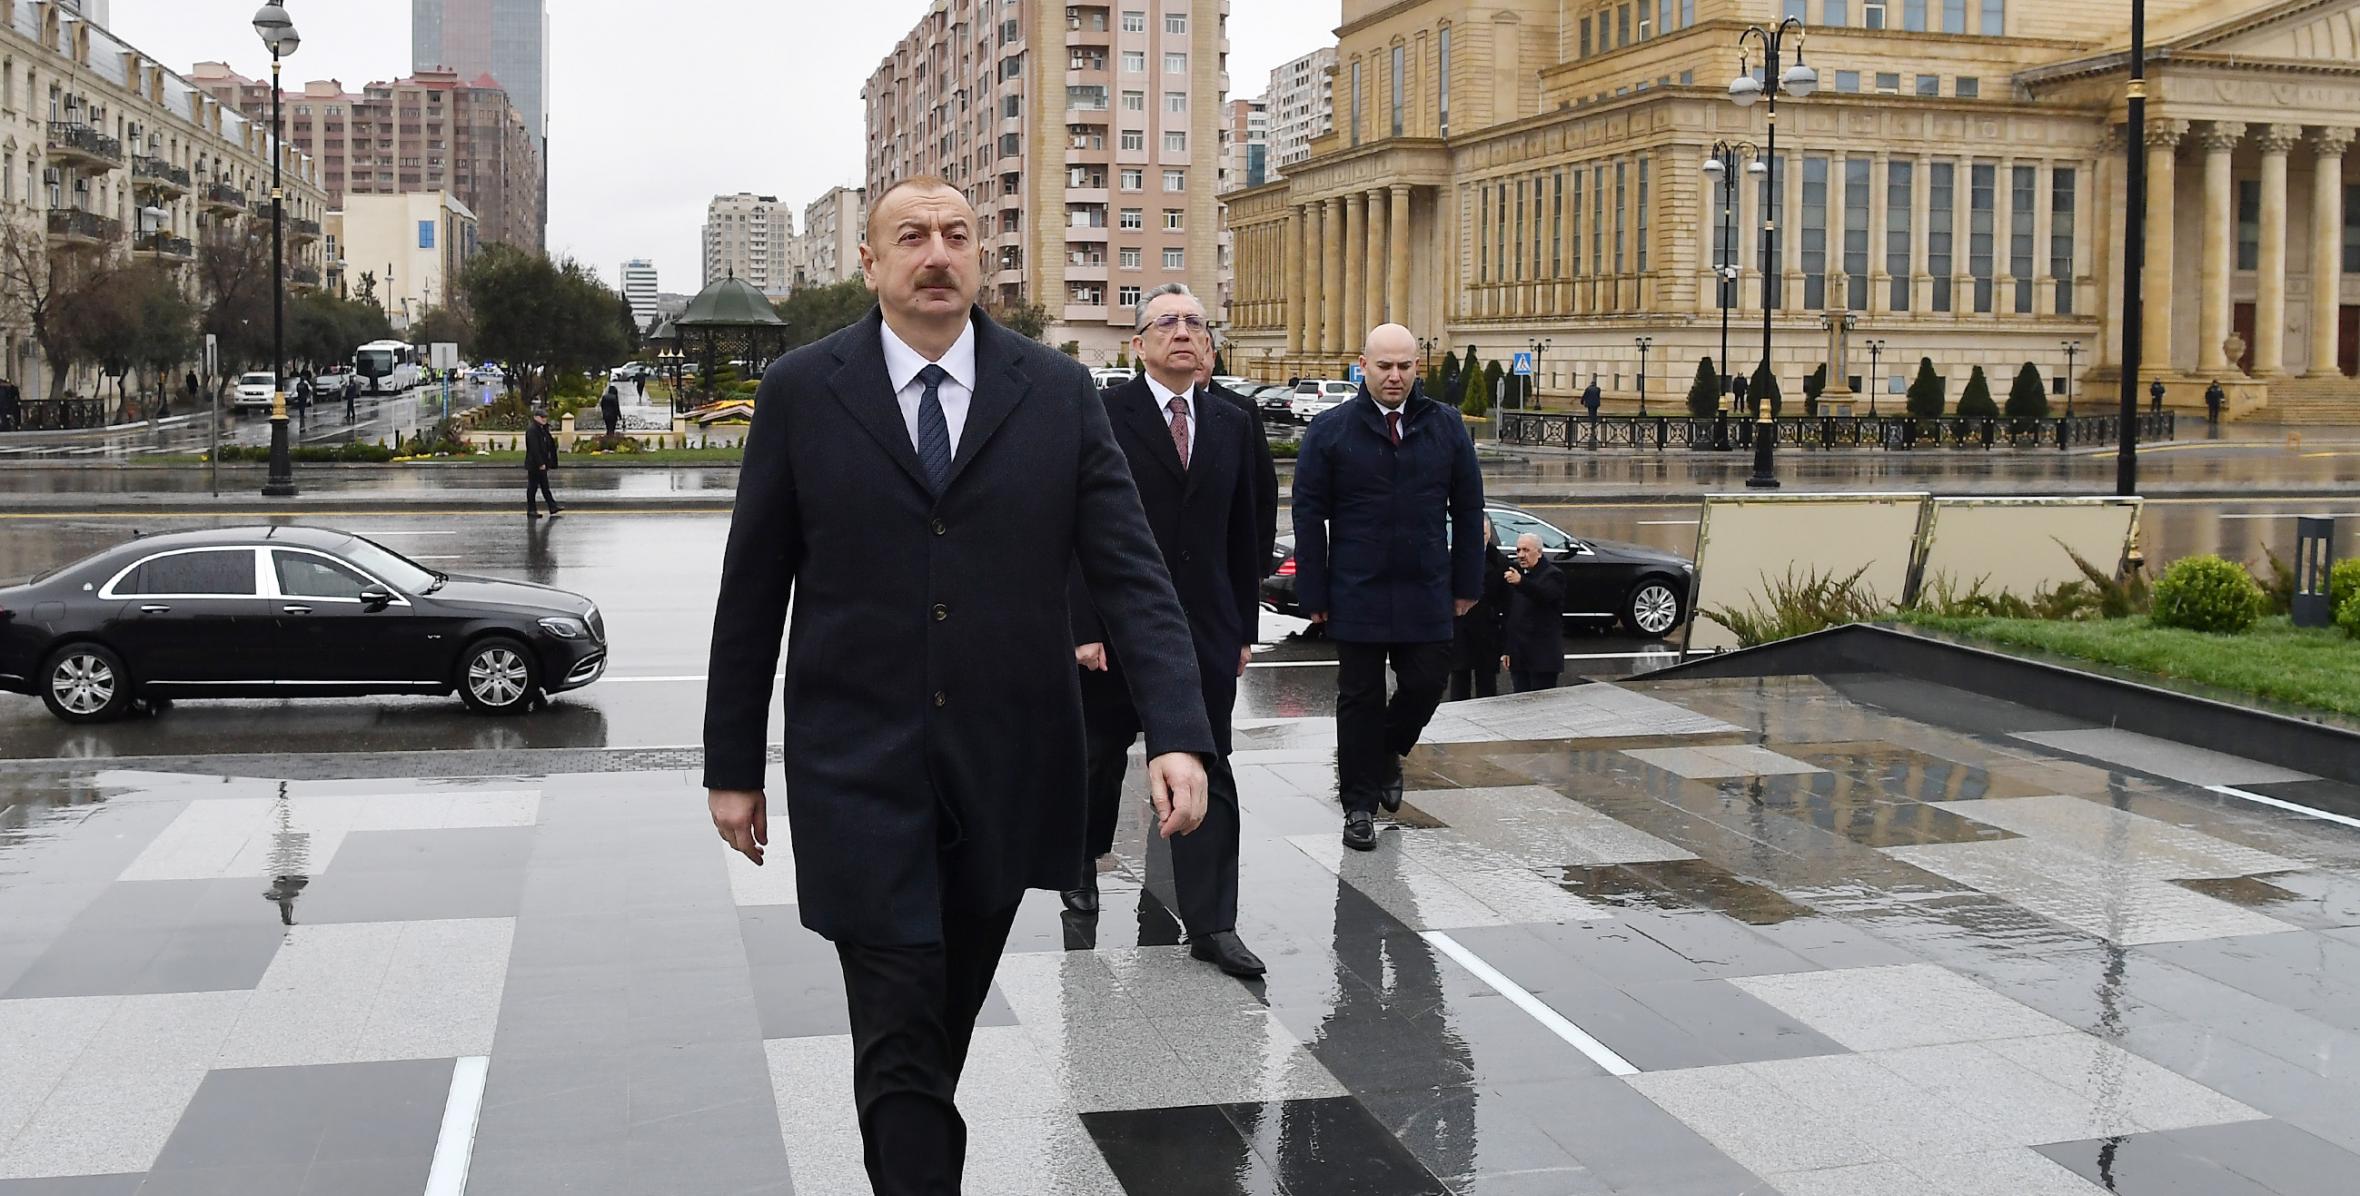 Ilham Aliyev visited newly-built park where statue of Shah Ismail Khatai was moved